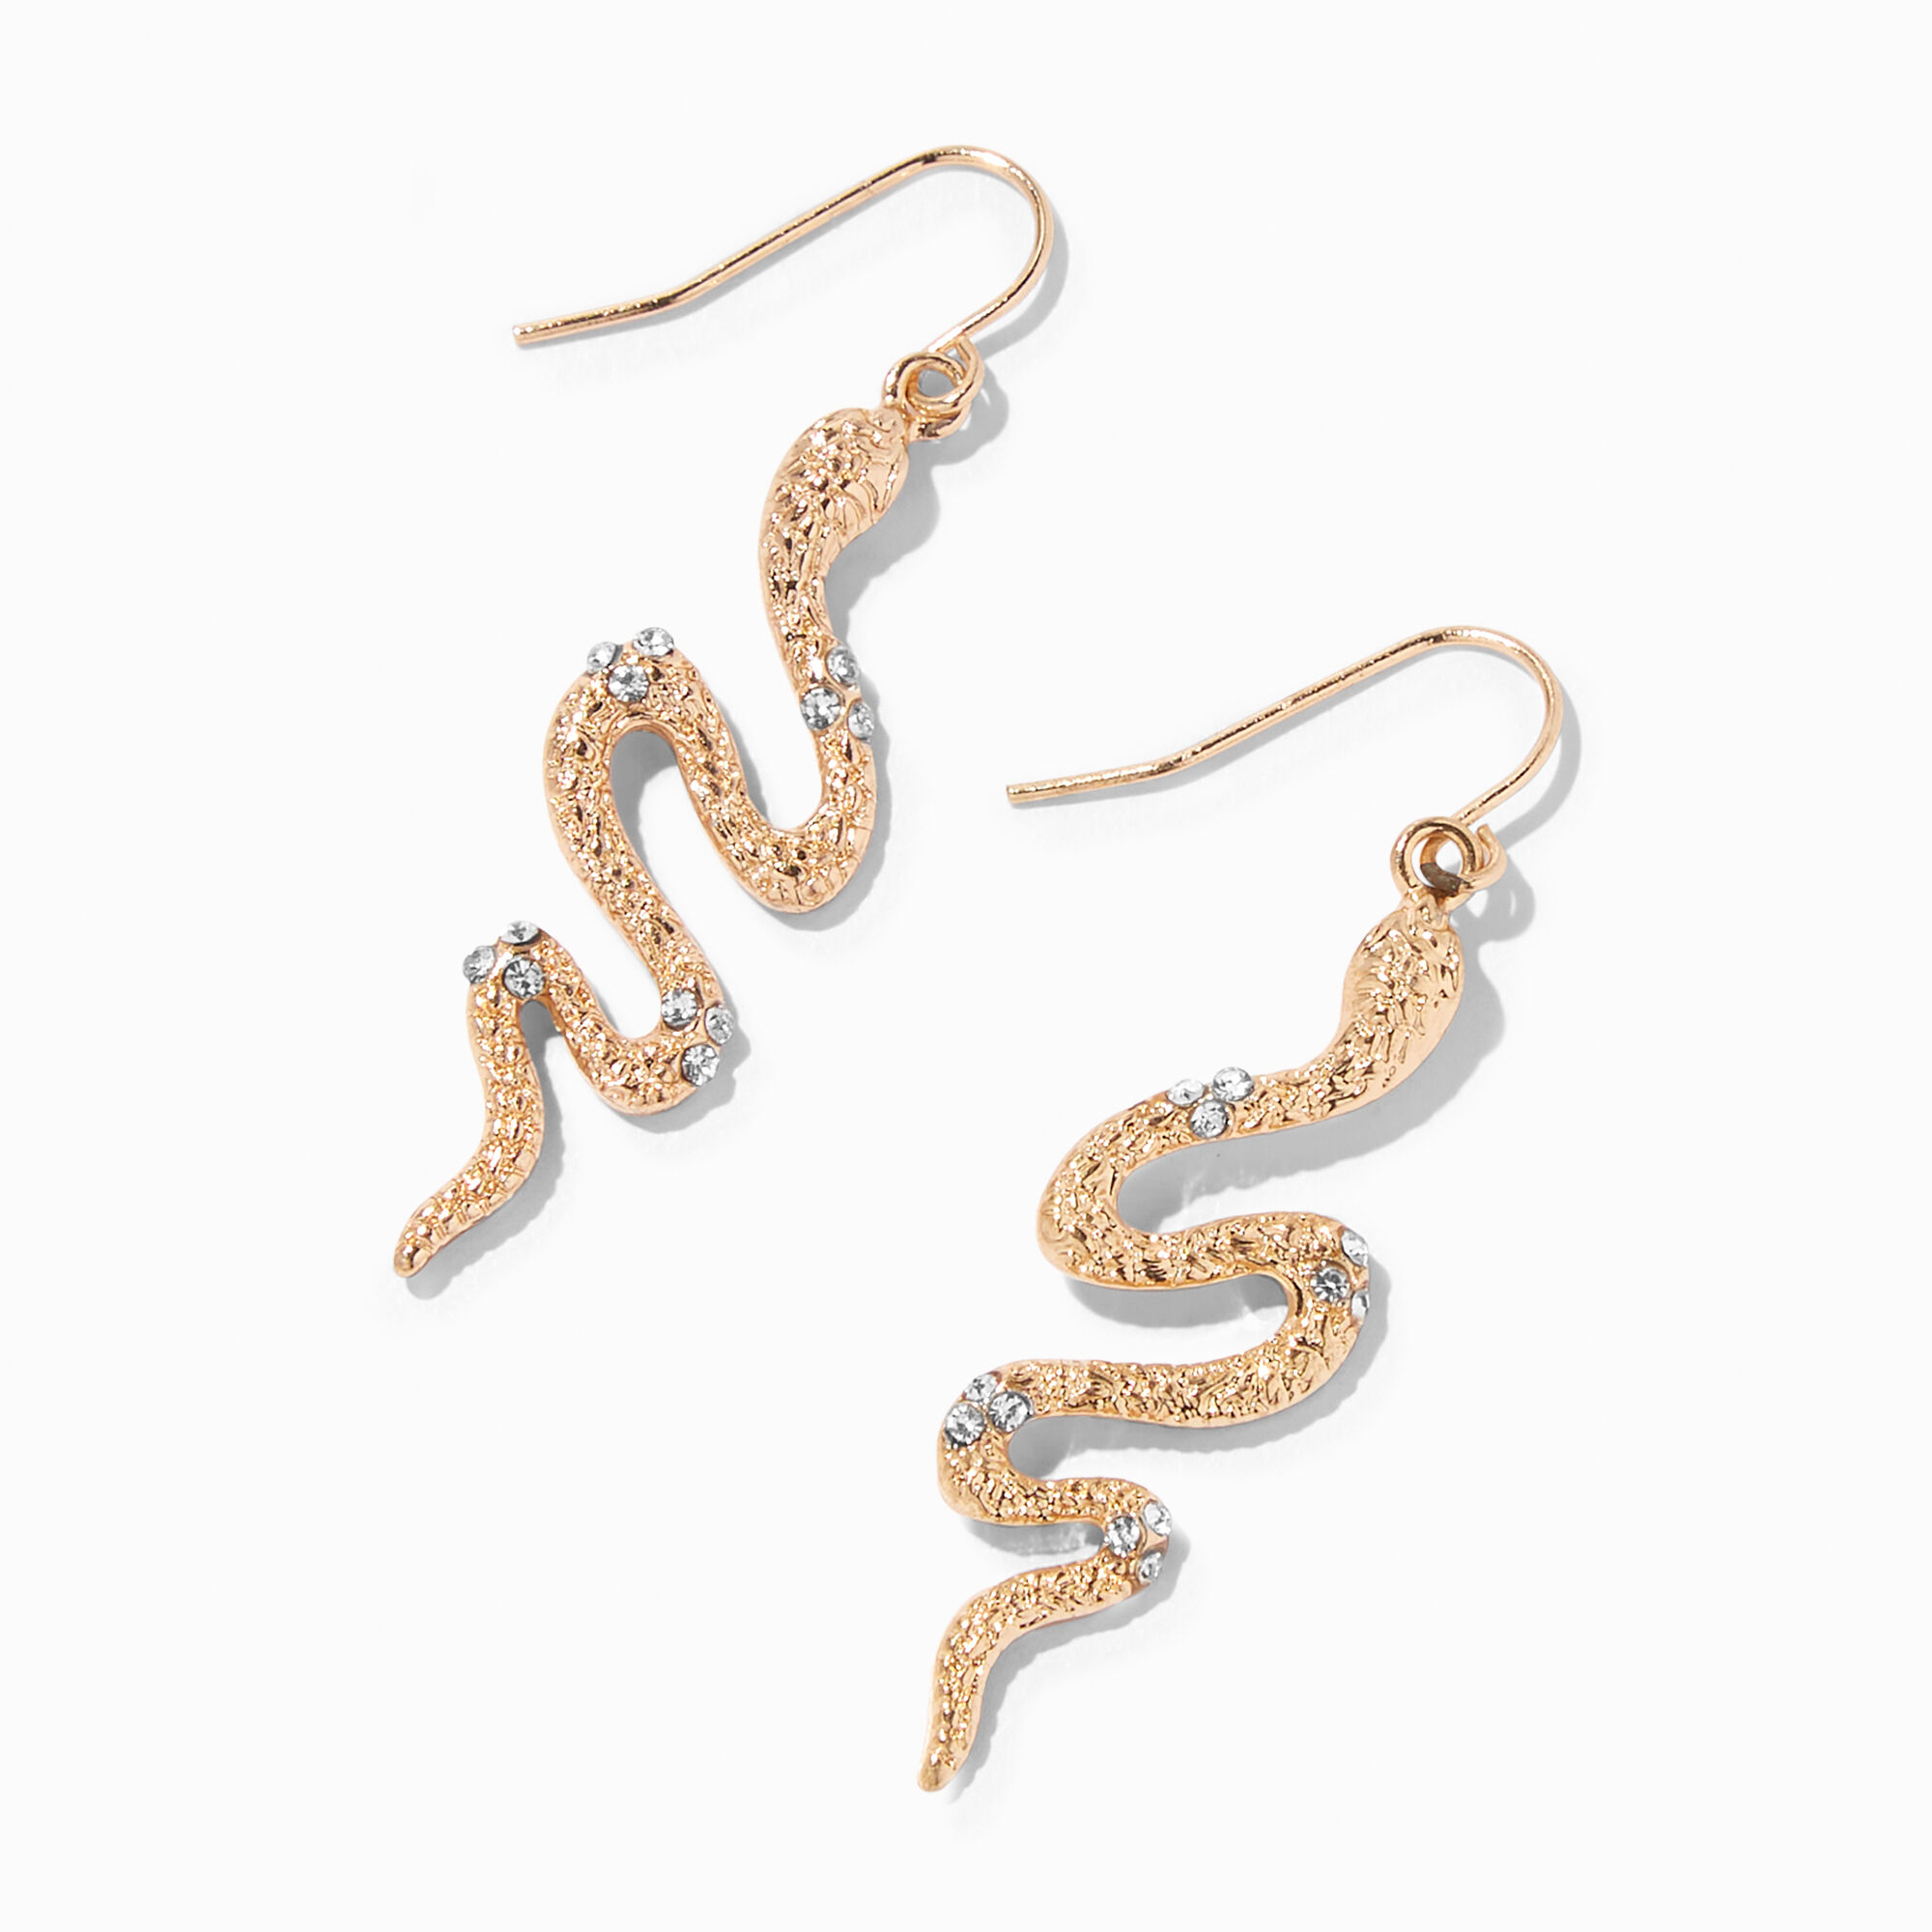 View Claires Tone 15 Embellished Snake Drop Earrings Gold information